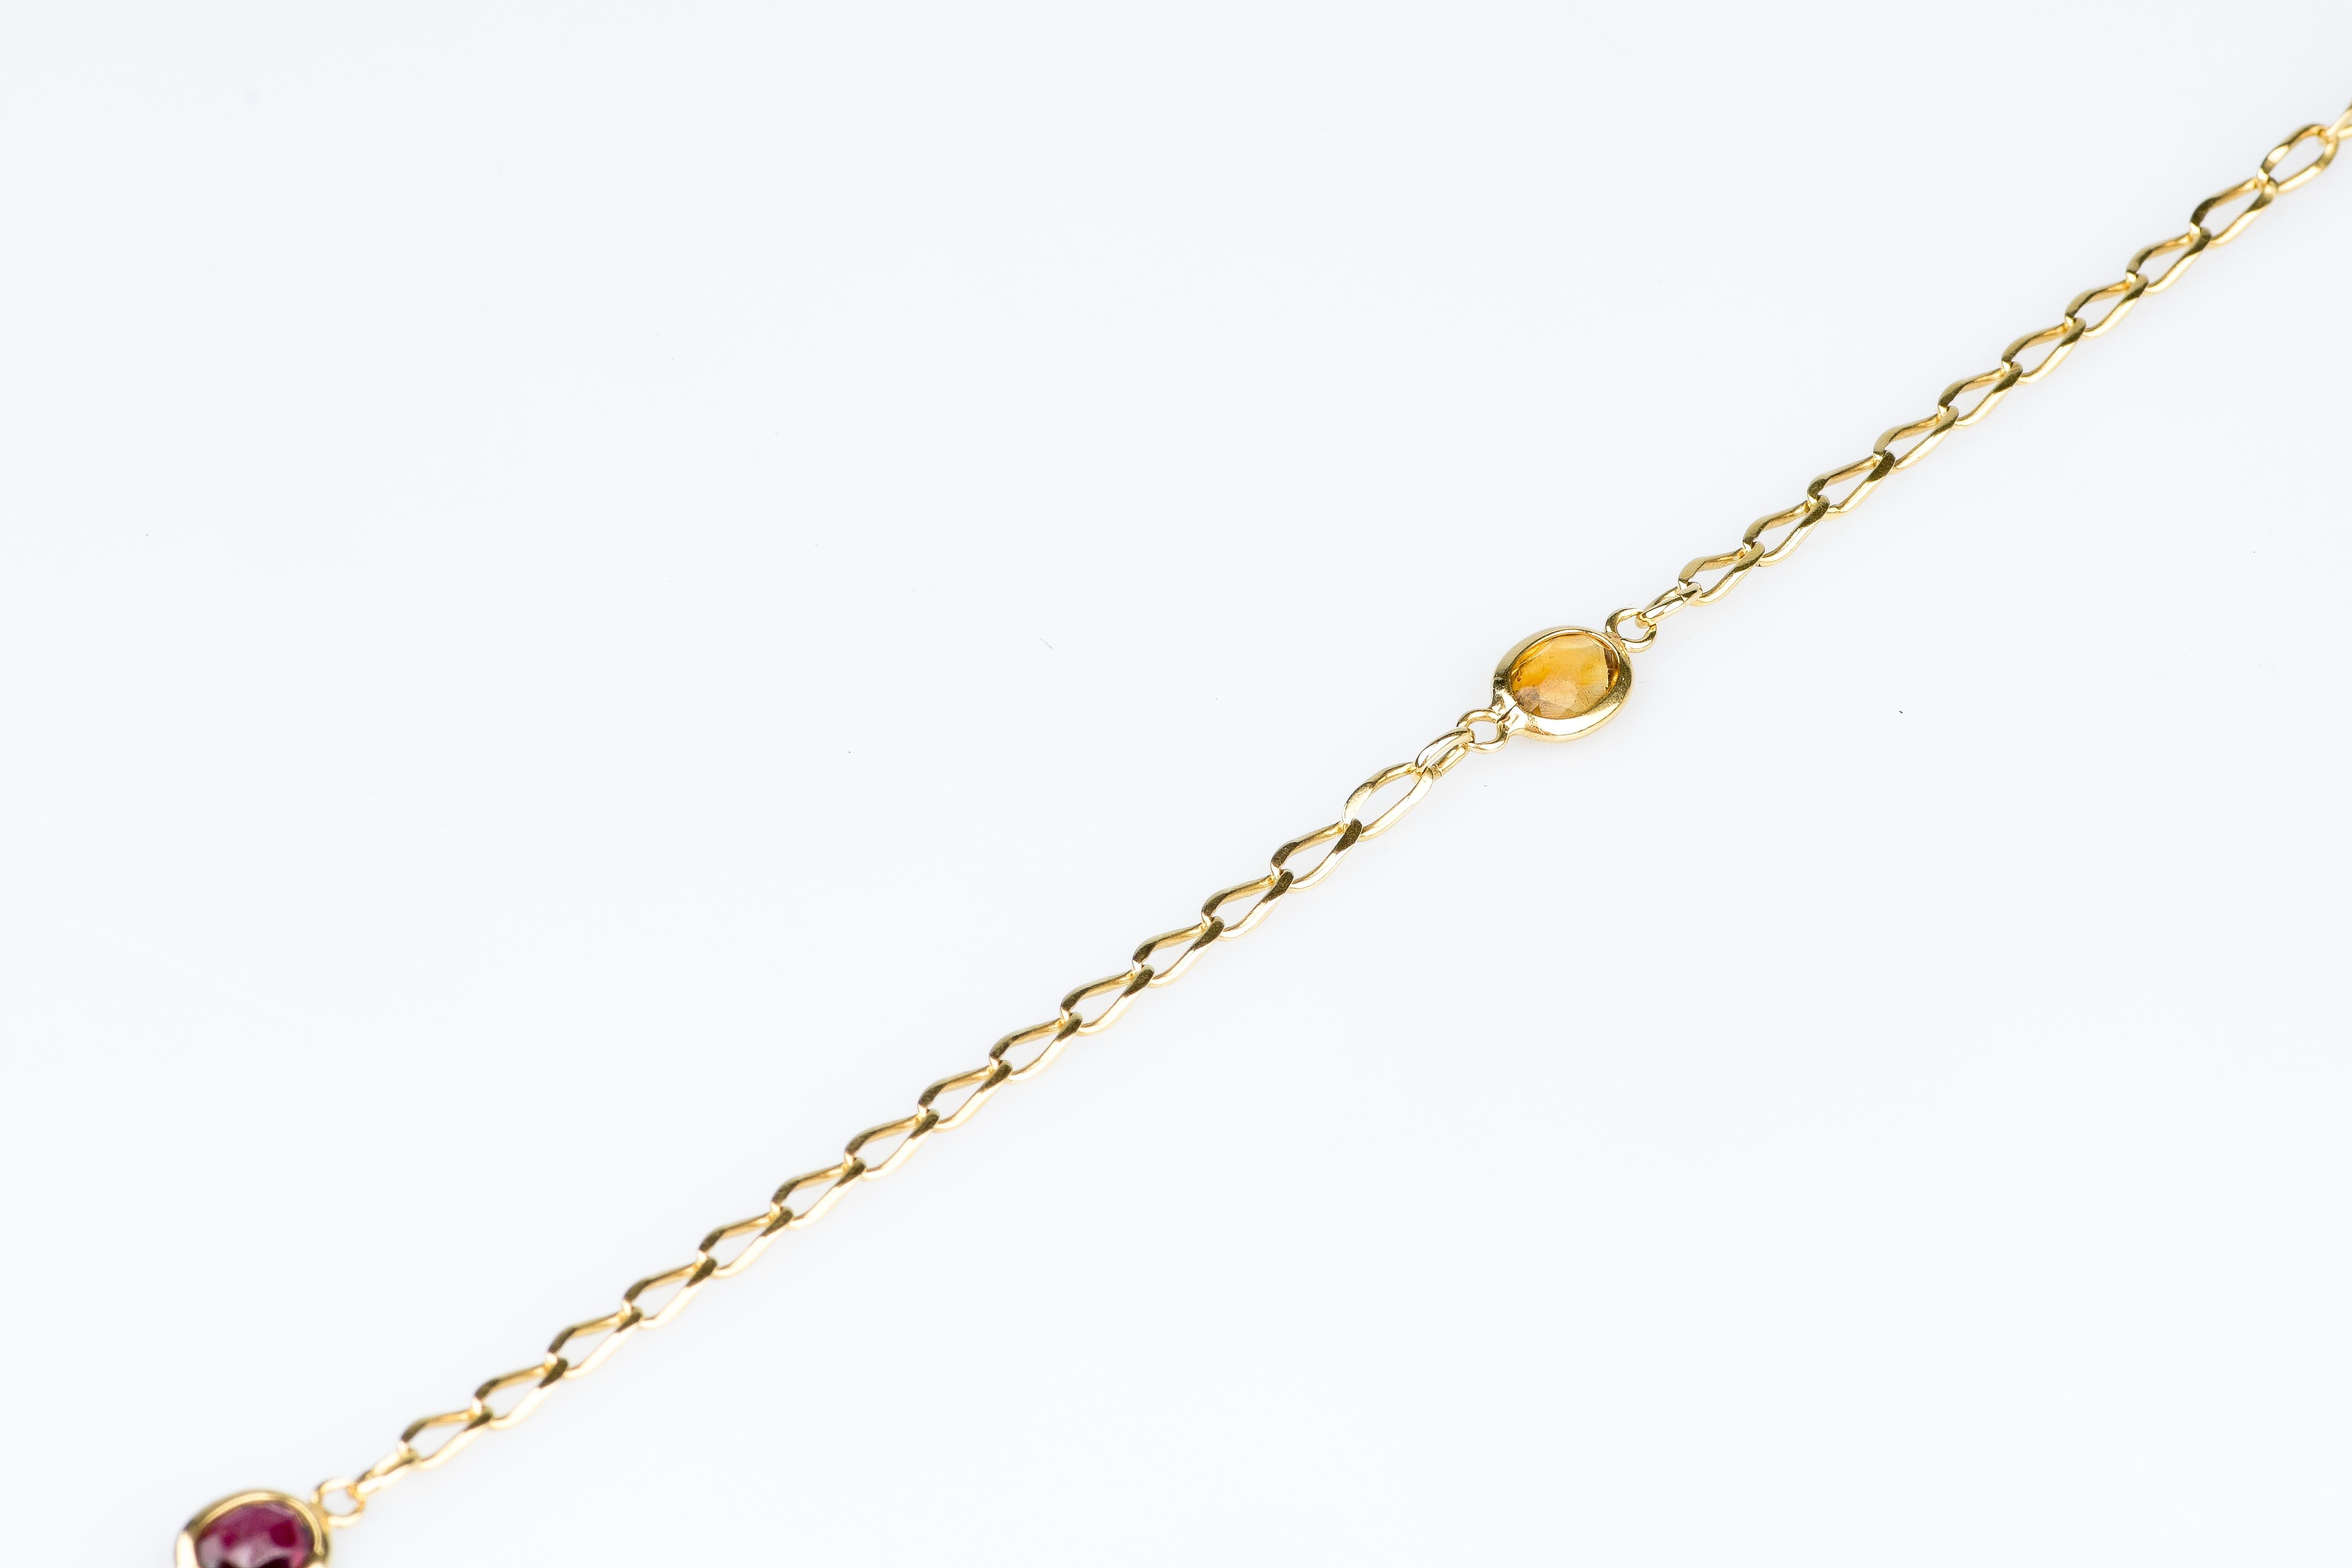 Women's  18 carat yellow gold double turn bracelet designed with 5 semi-precious stones For Sale